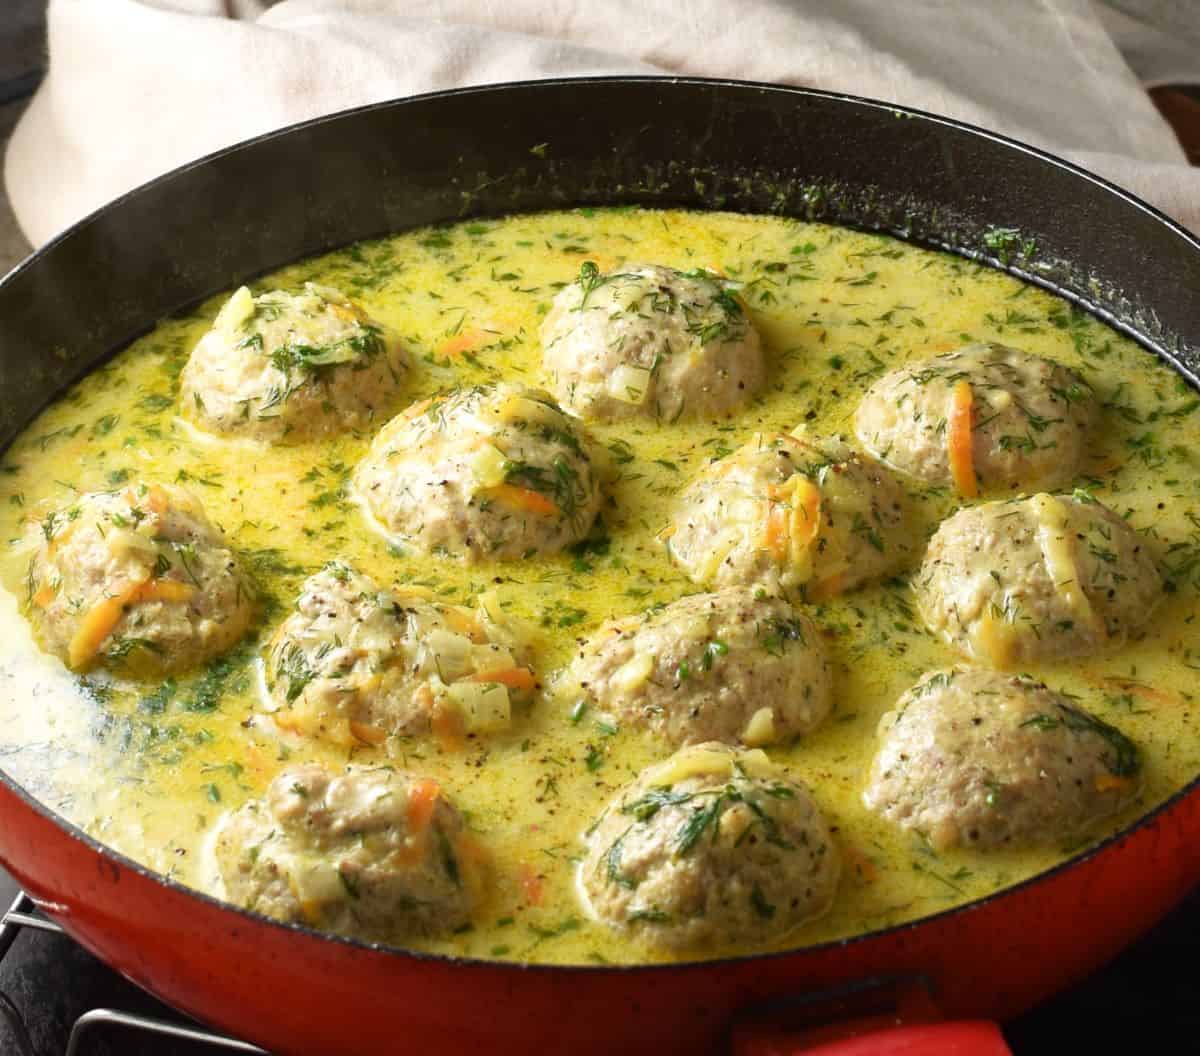 Side view of Polish pulpety meatballs in creamy broth in red shallow pan.